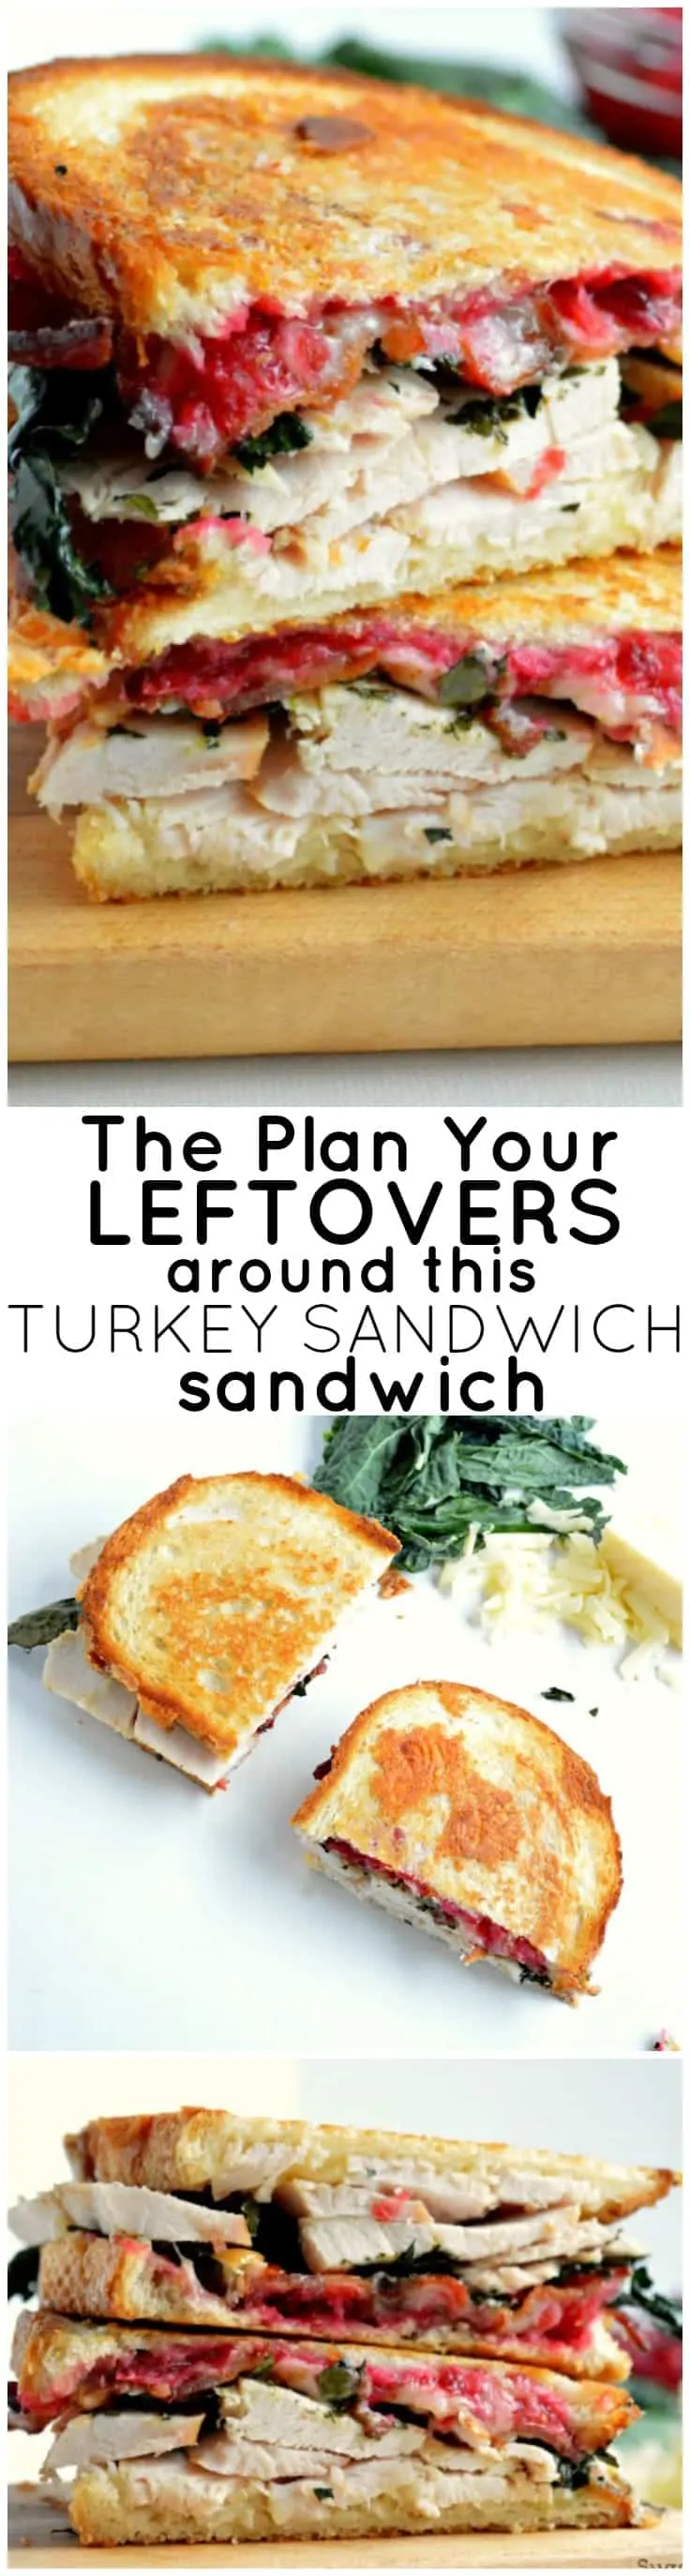 You will ABSOLUTELY want to plan your leftovers around this turkey sandwich!